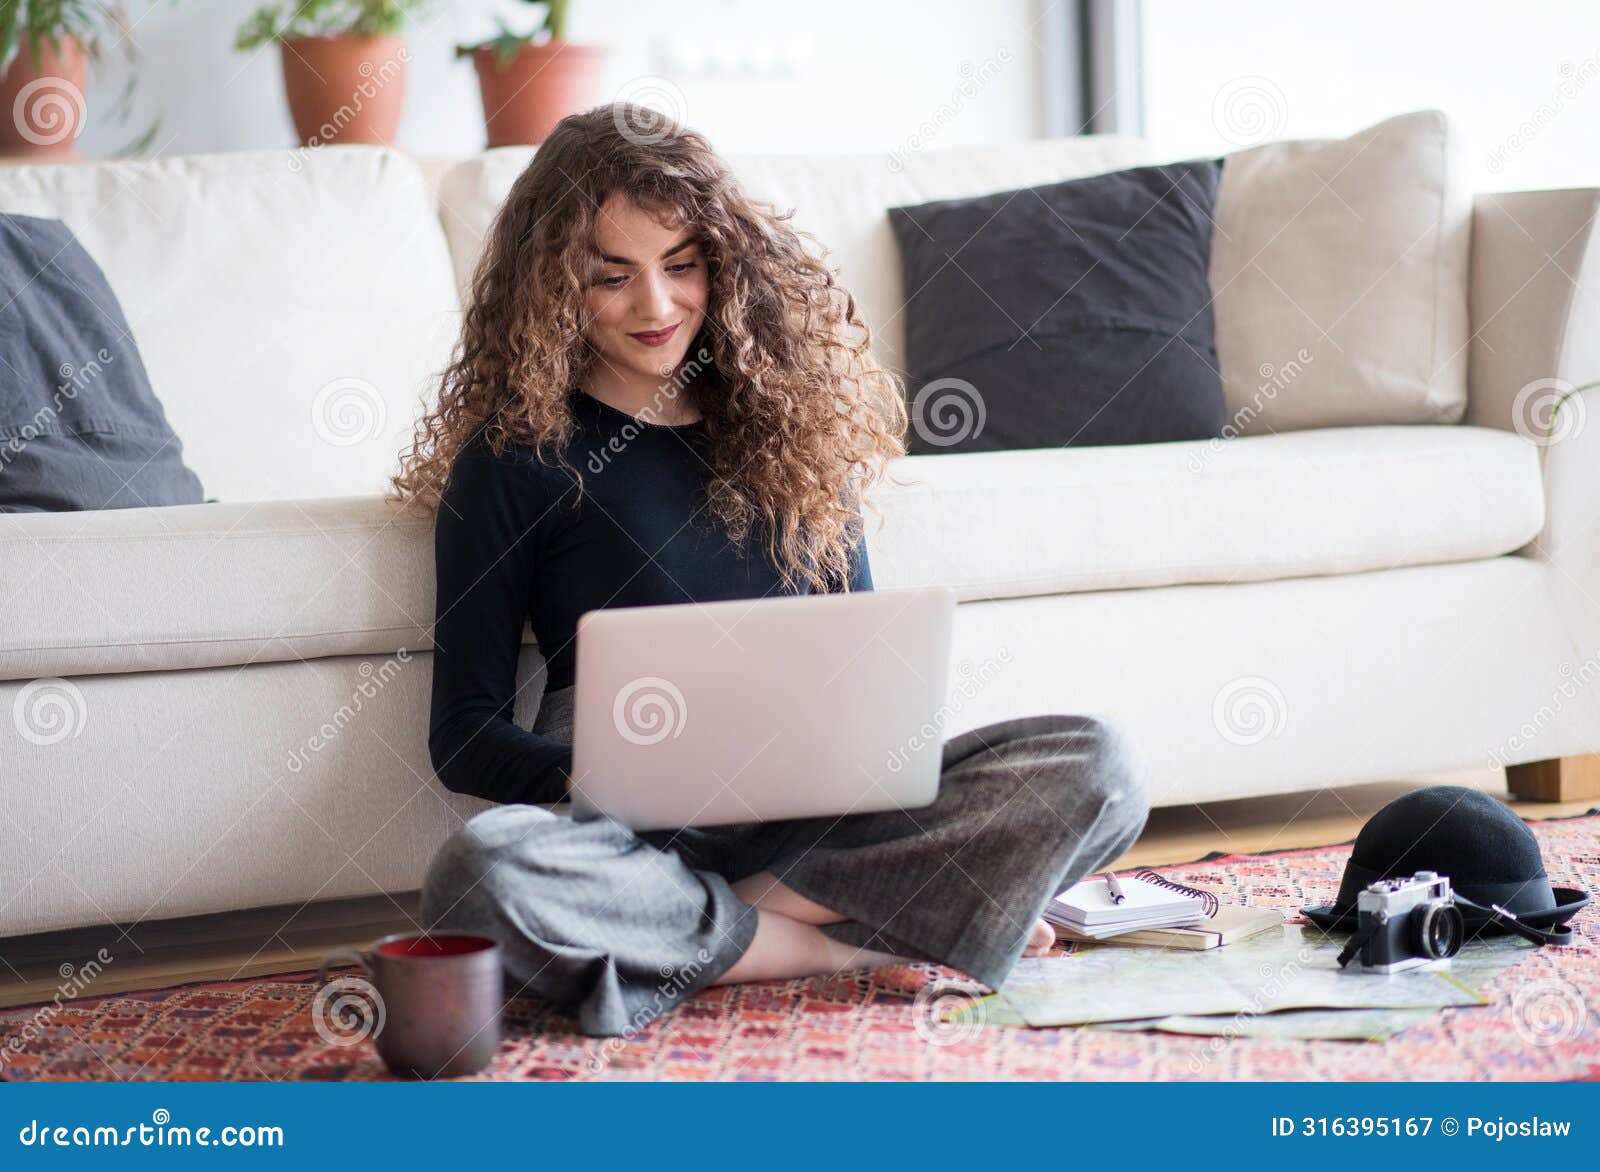 beautiful woman planning summer vacation abroad, going on trip alone. sitting on floor, working on itinerary on laptop.